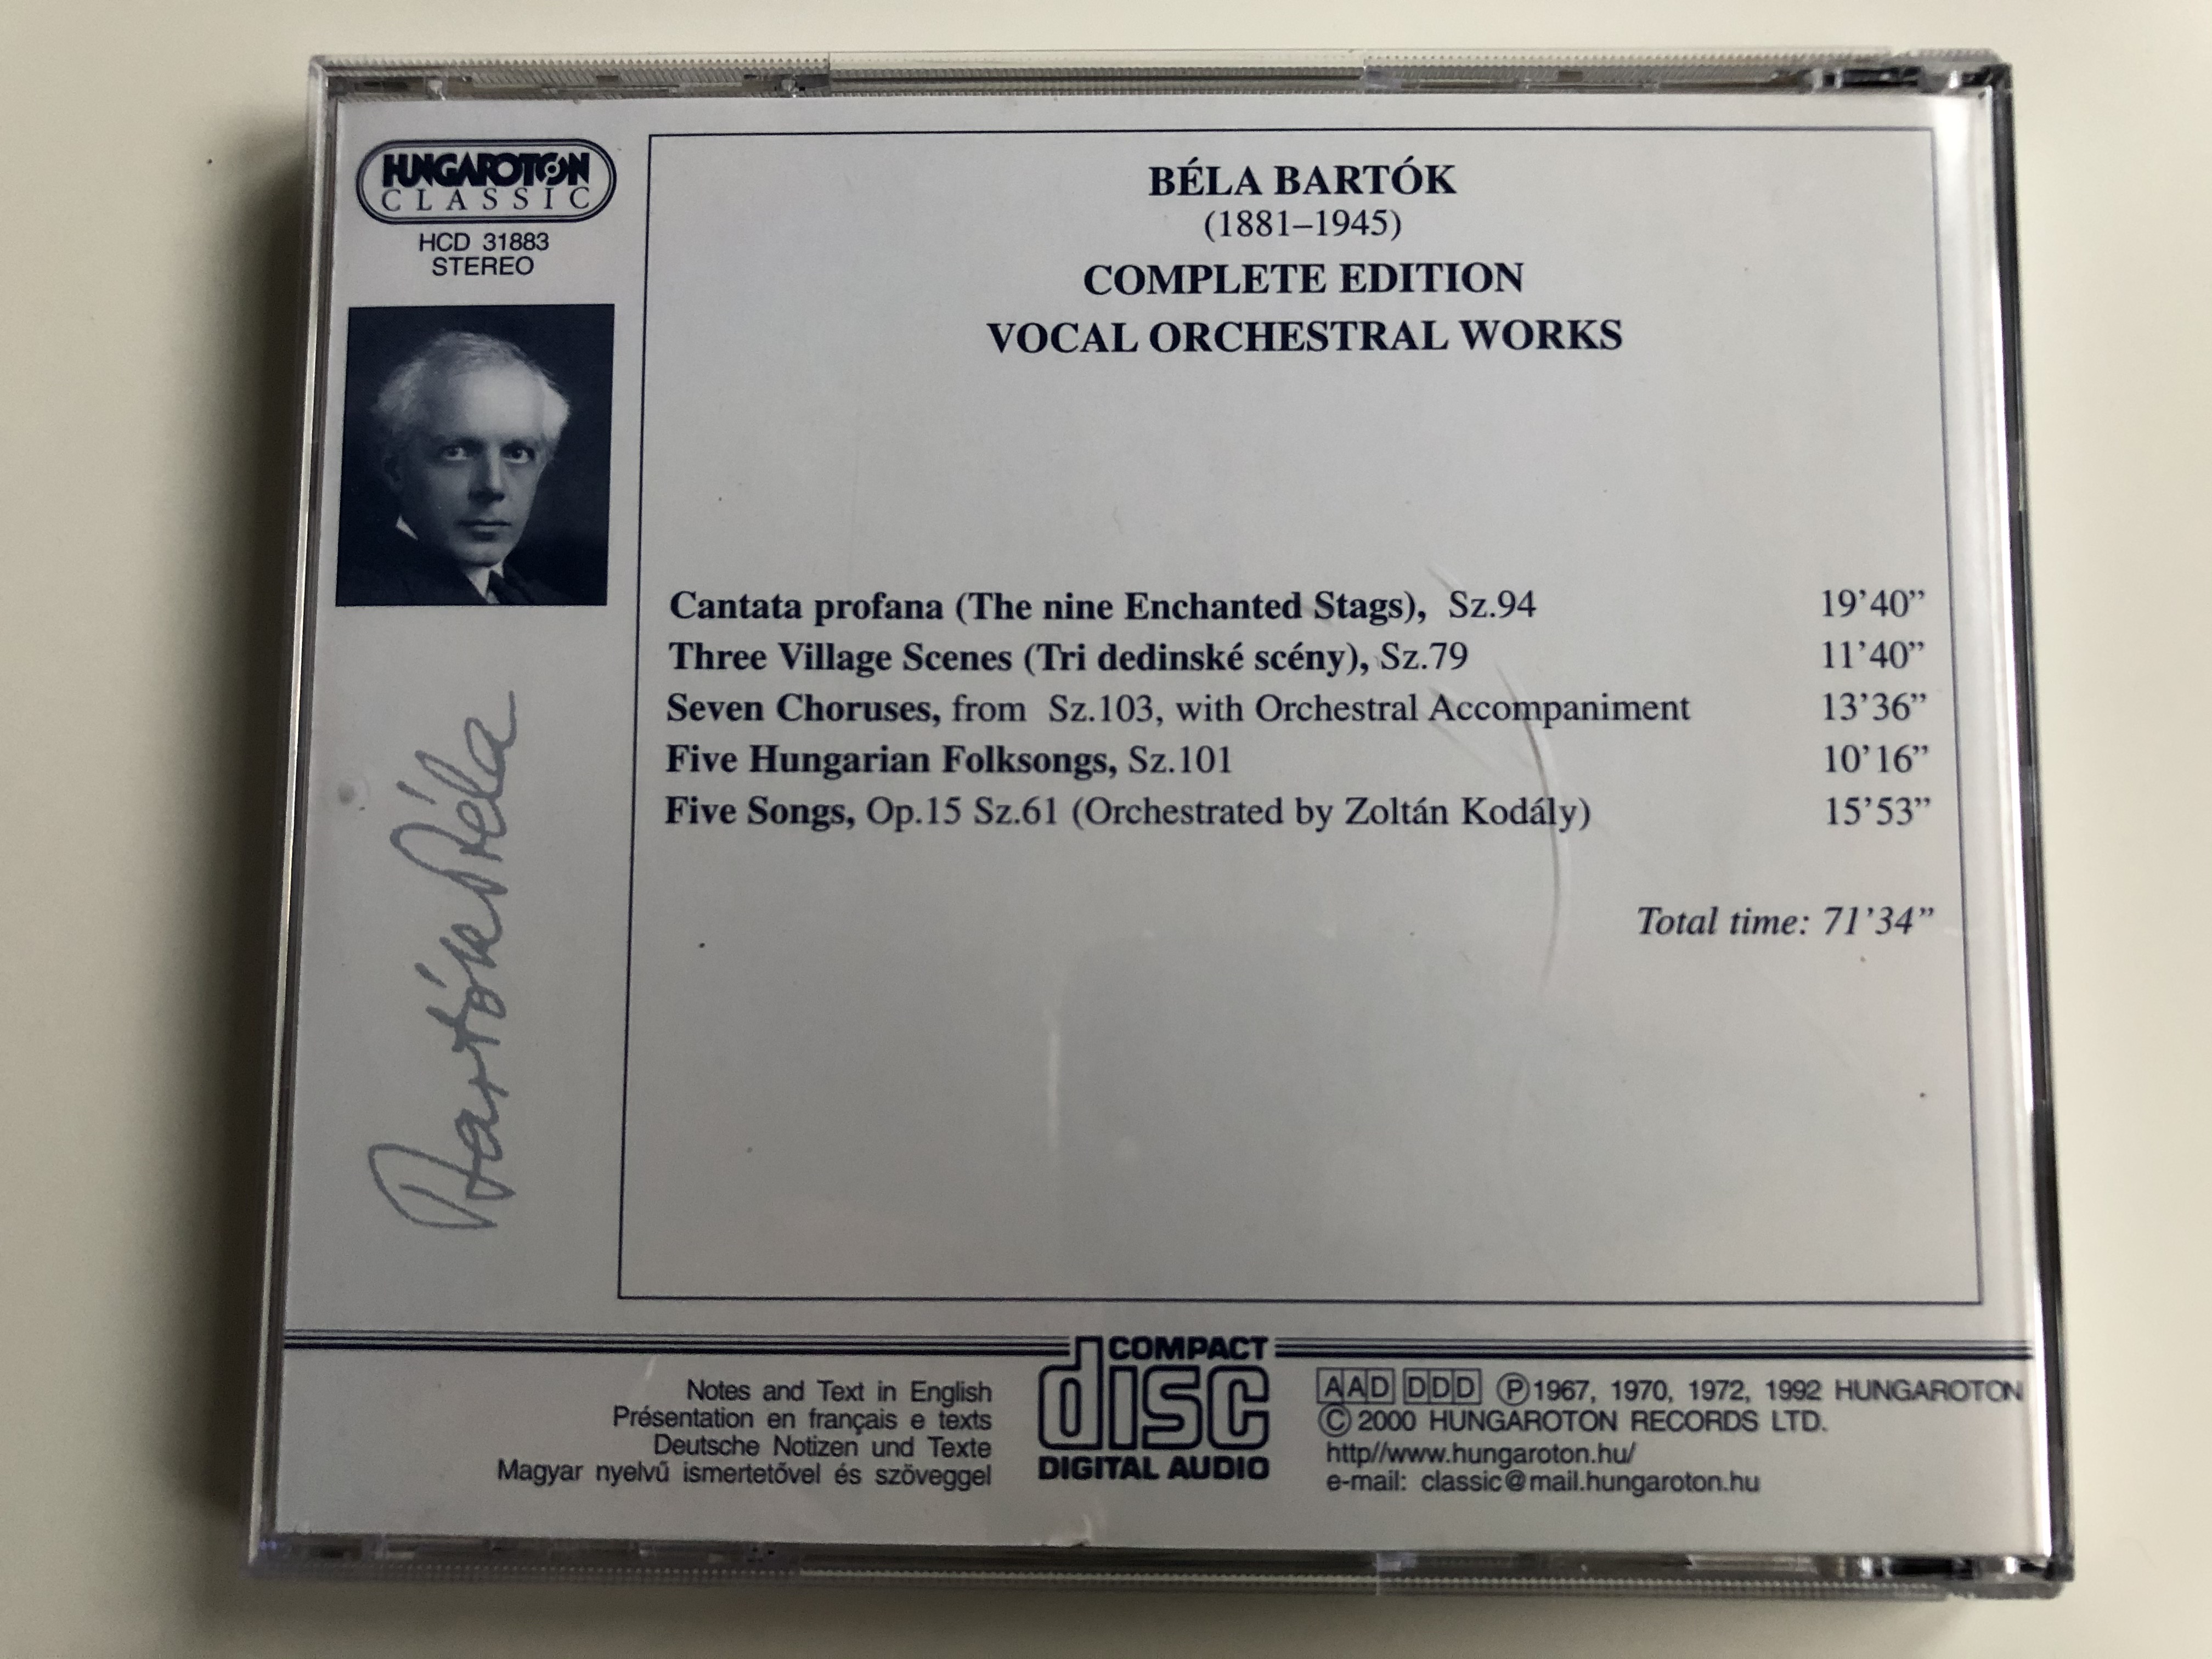 bartok-complete-edition-vocal-orchestral-works-cantata-profana-three-village-scenes-seven-choruses-five-hungarian-folksongs-five-songs-hungaroton-classic-audio-cd-2000-stereo-hcd-31883-10-.jpg